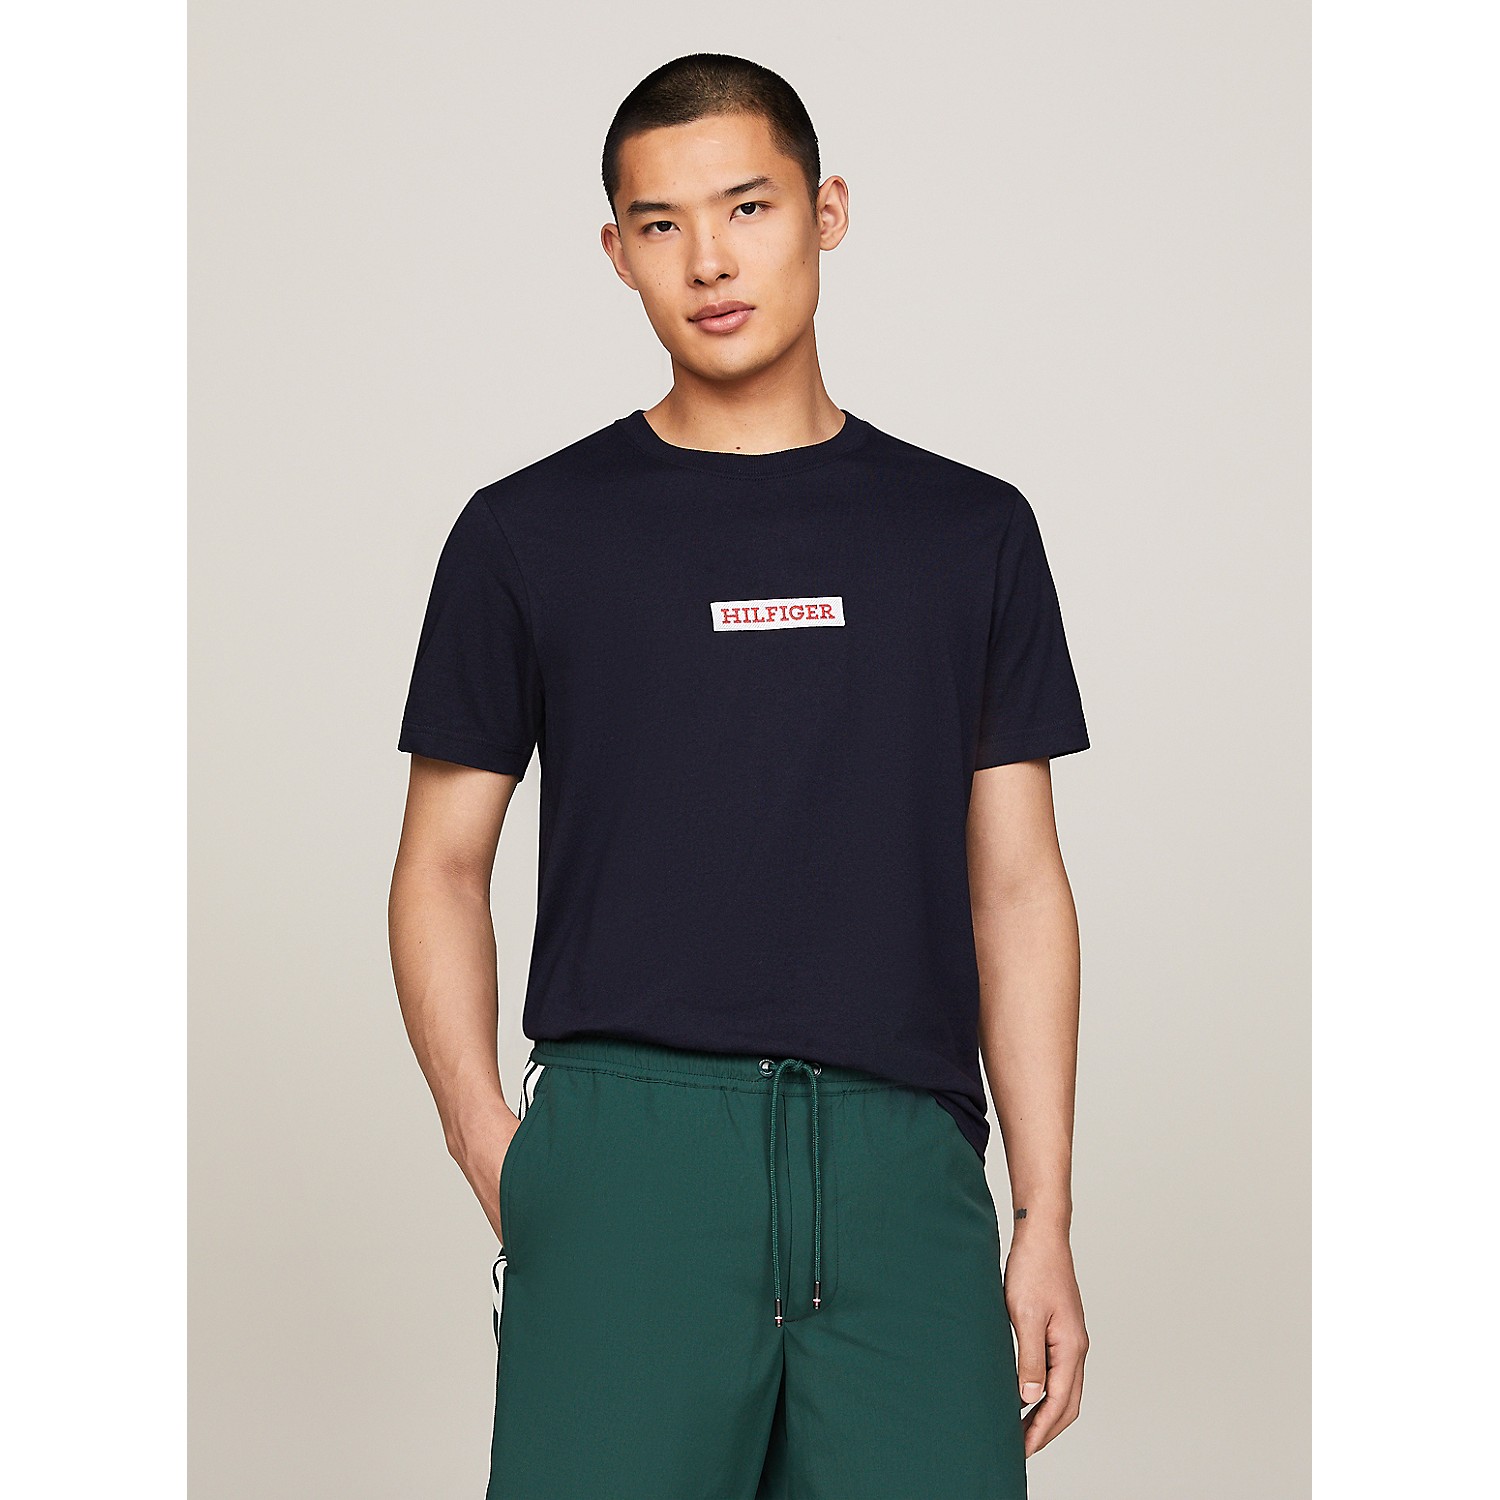 TOMMY HILFIGER Monotype Patch T-Shirt